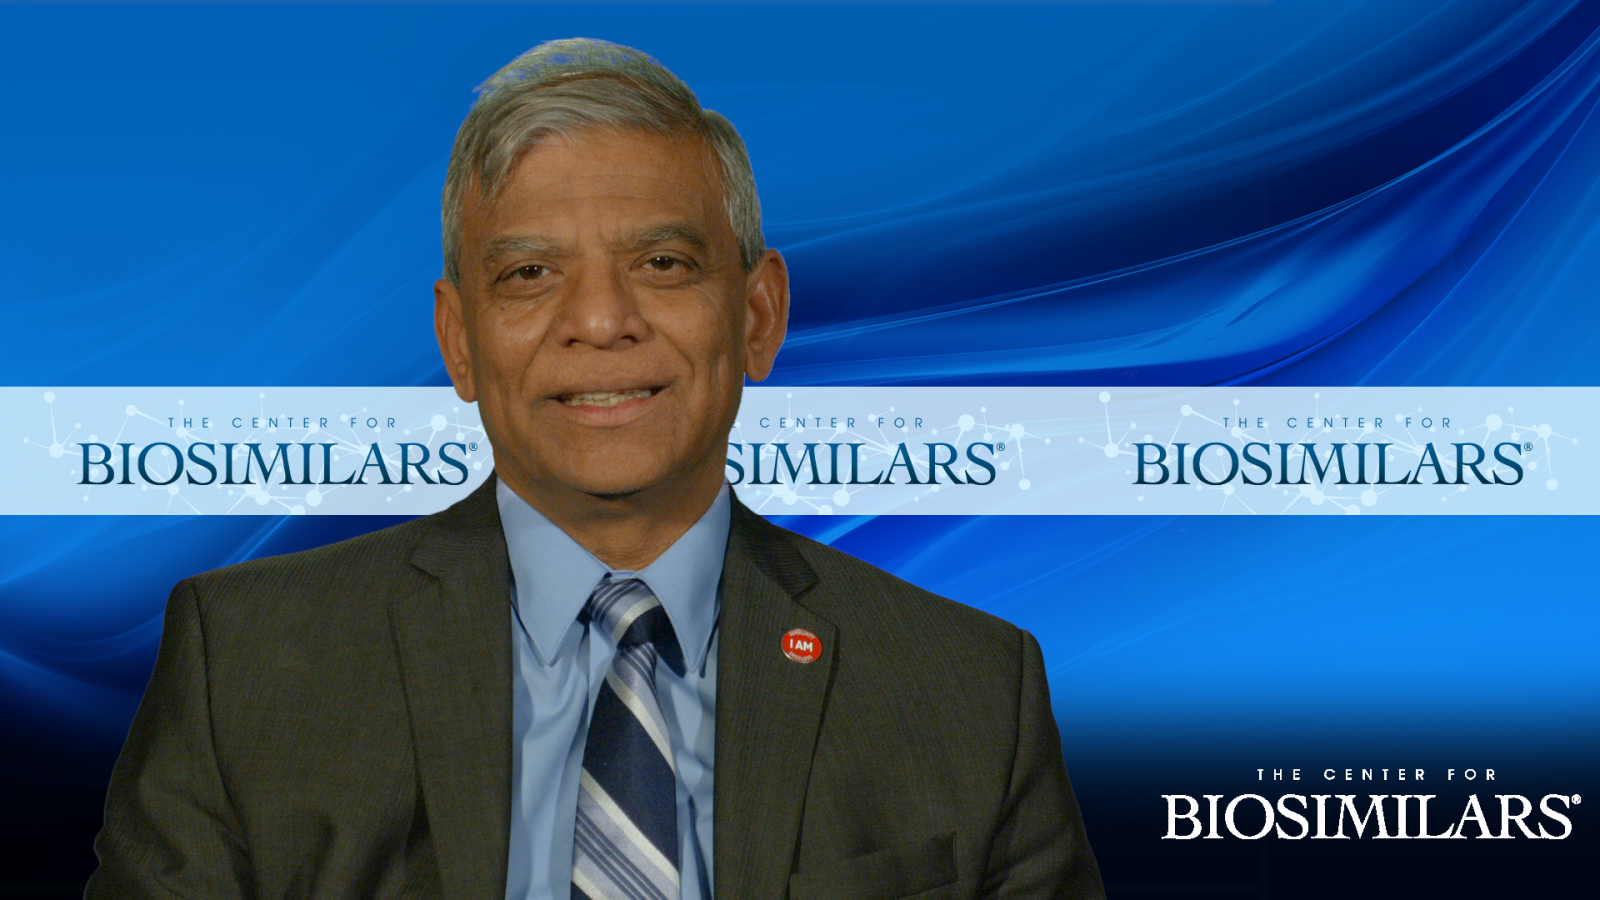 Available Oncology Biosimilars and Their Efficacy